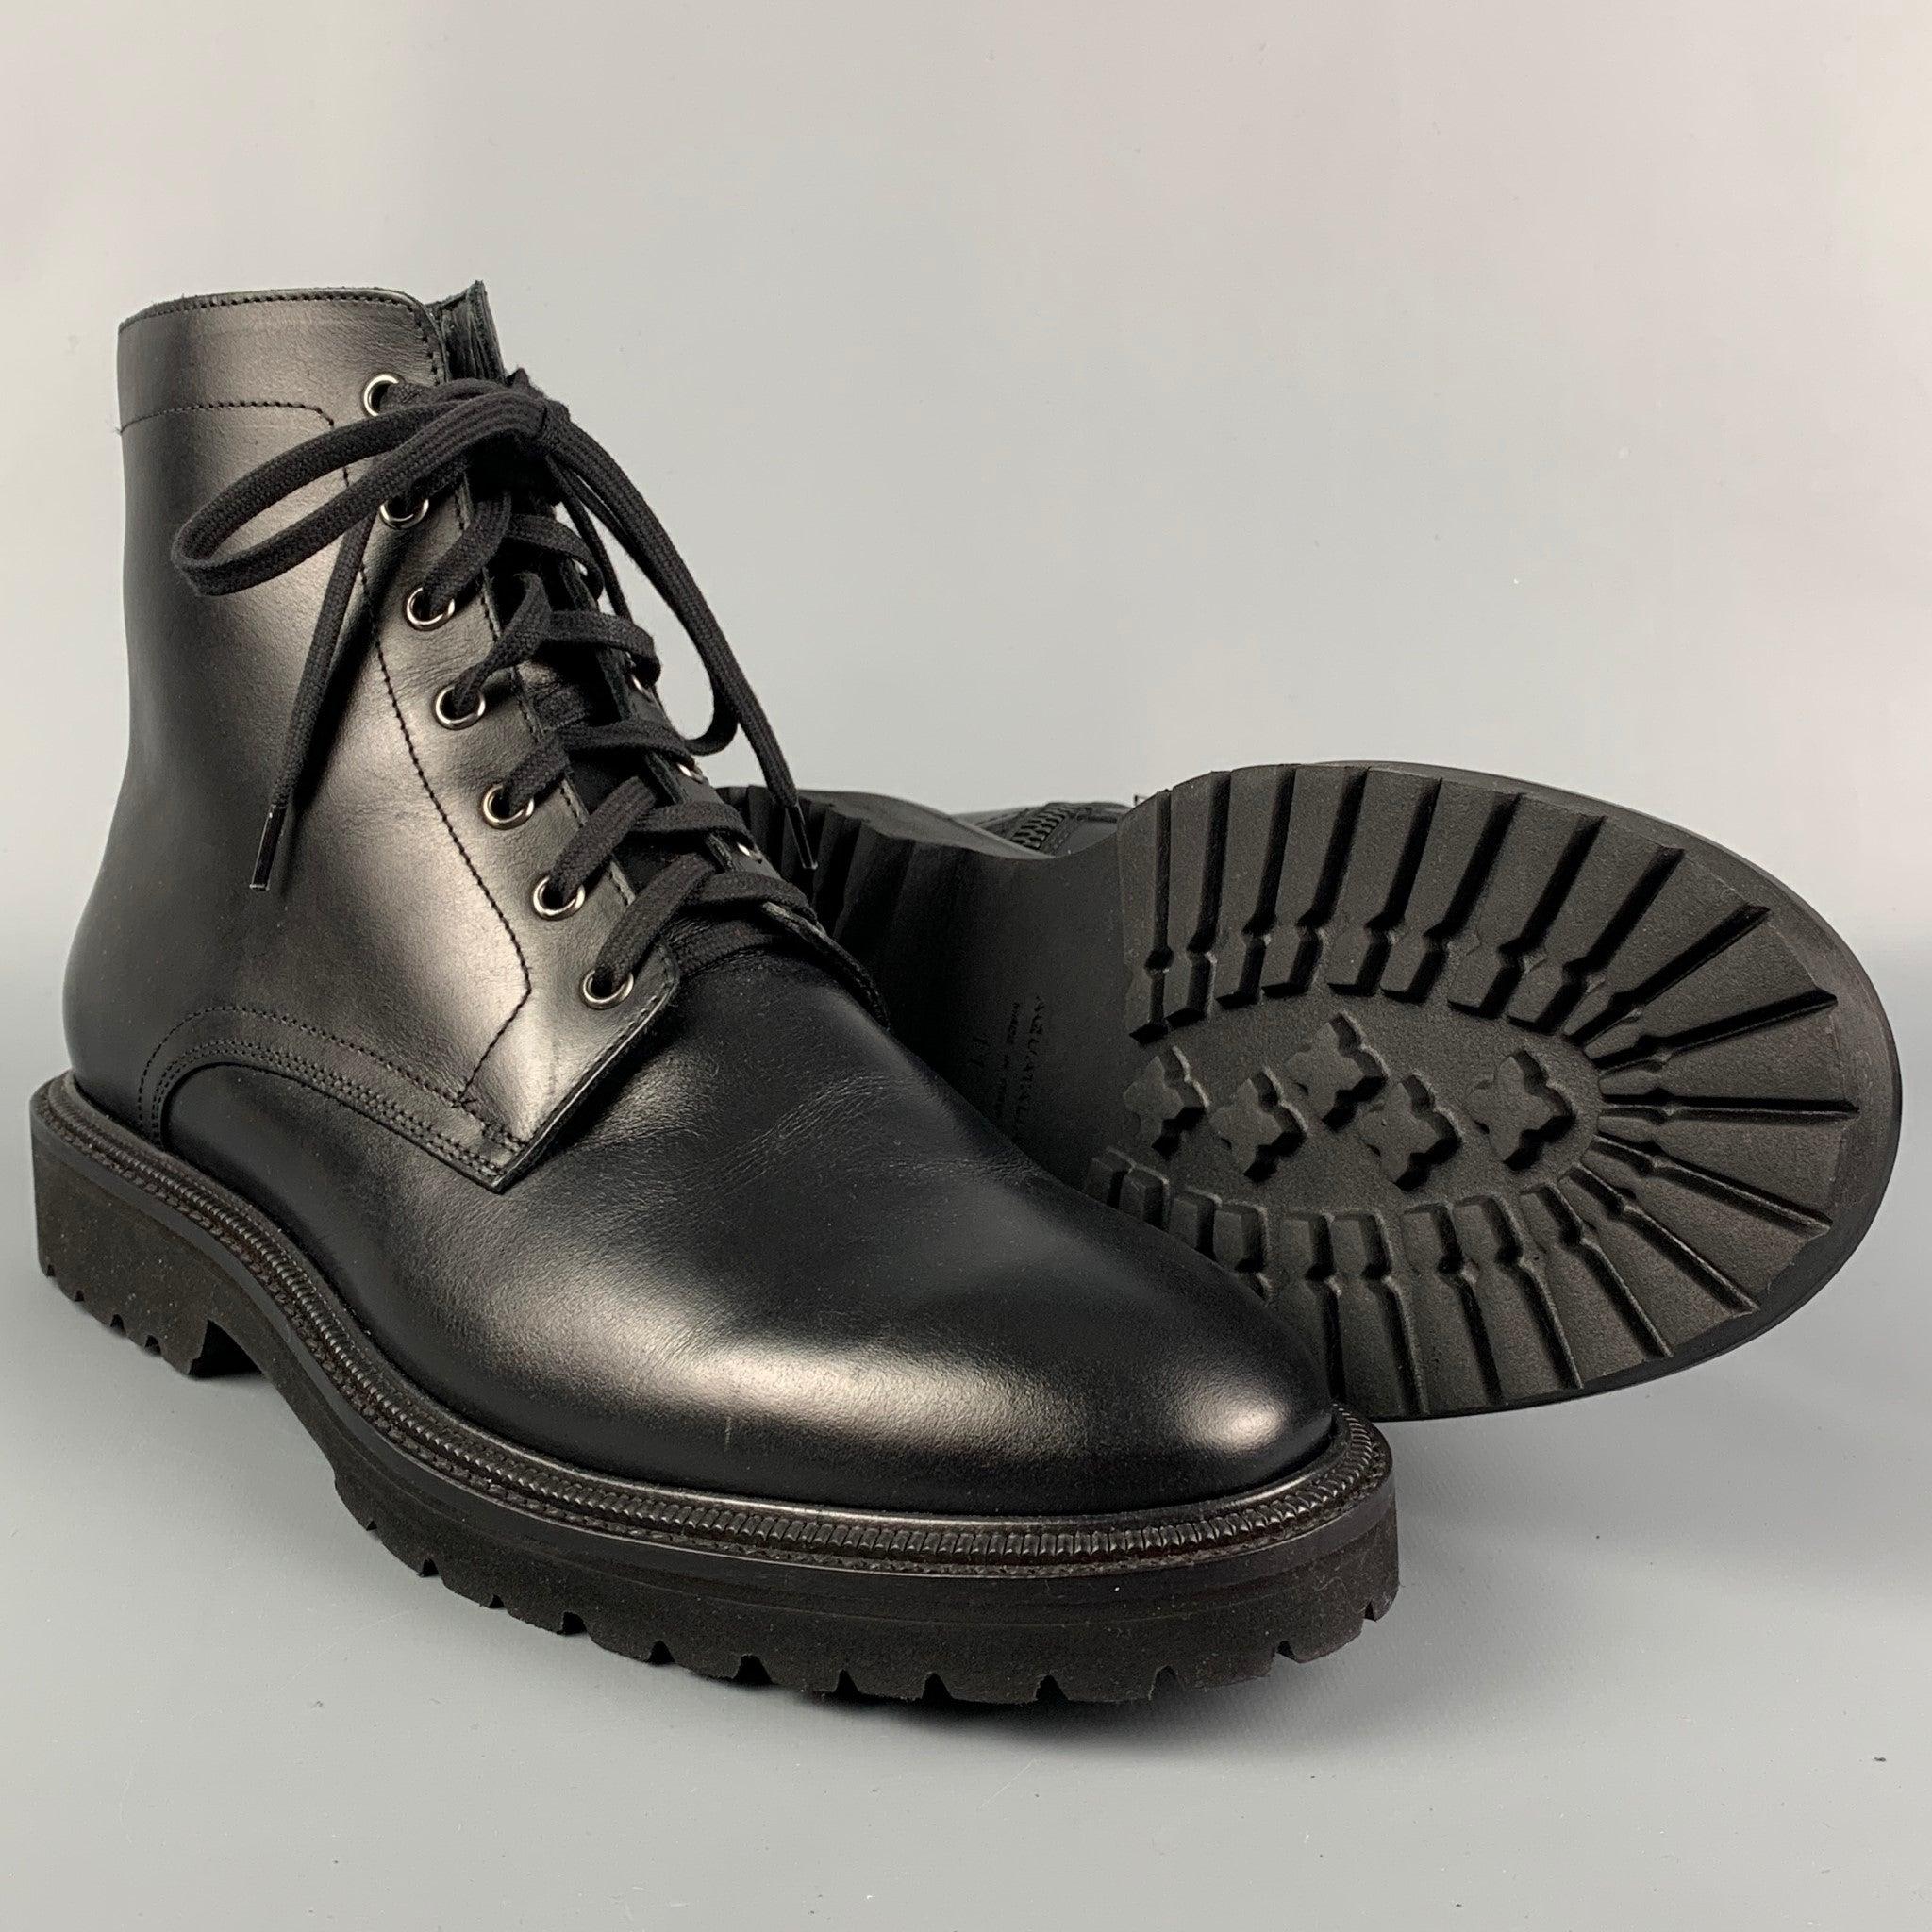 AQUATALIA Size 11 Black Leather Lace Up Boots In Good Condition For Sale In San Francisco, CA